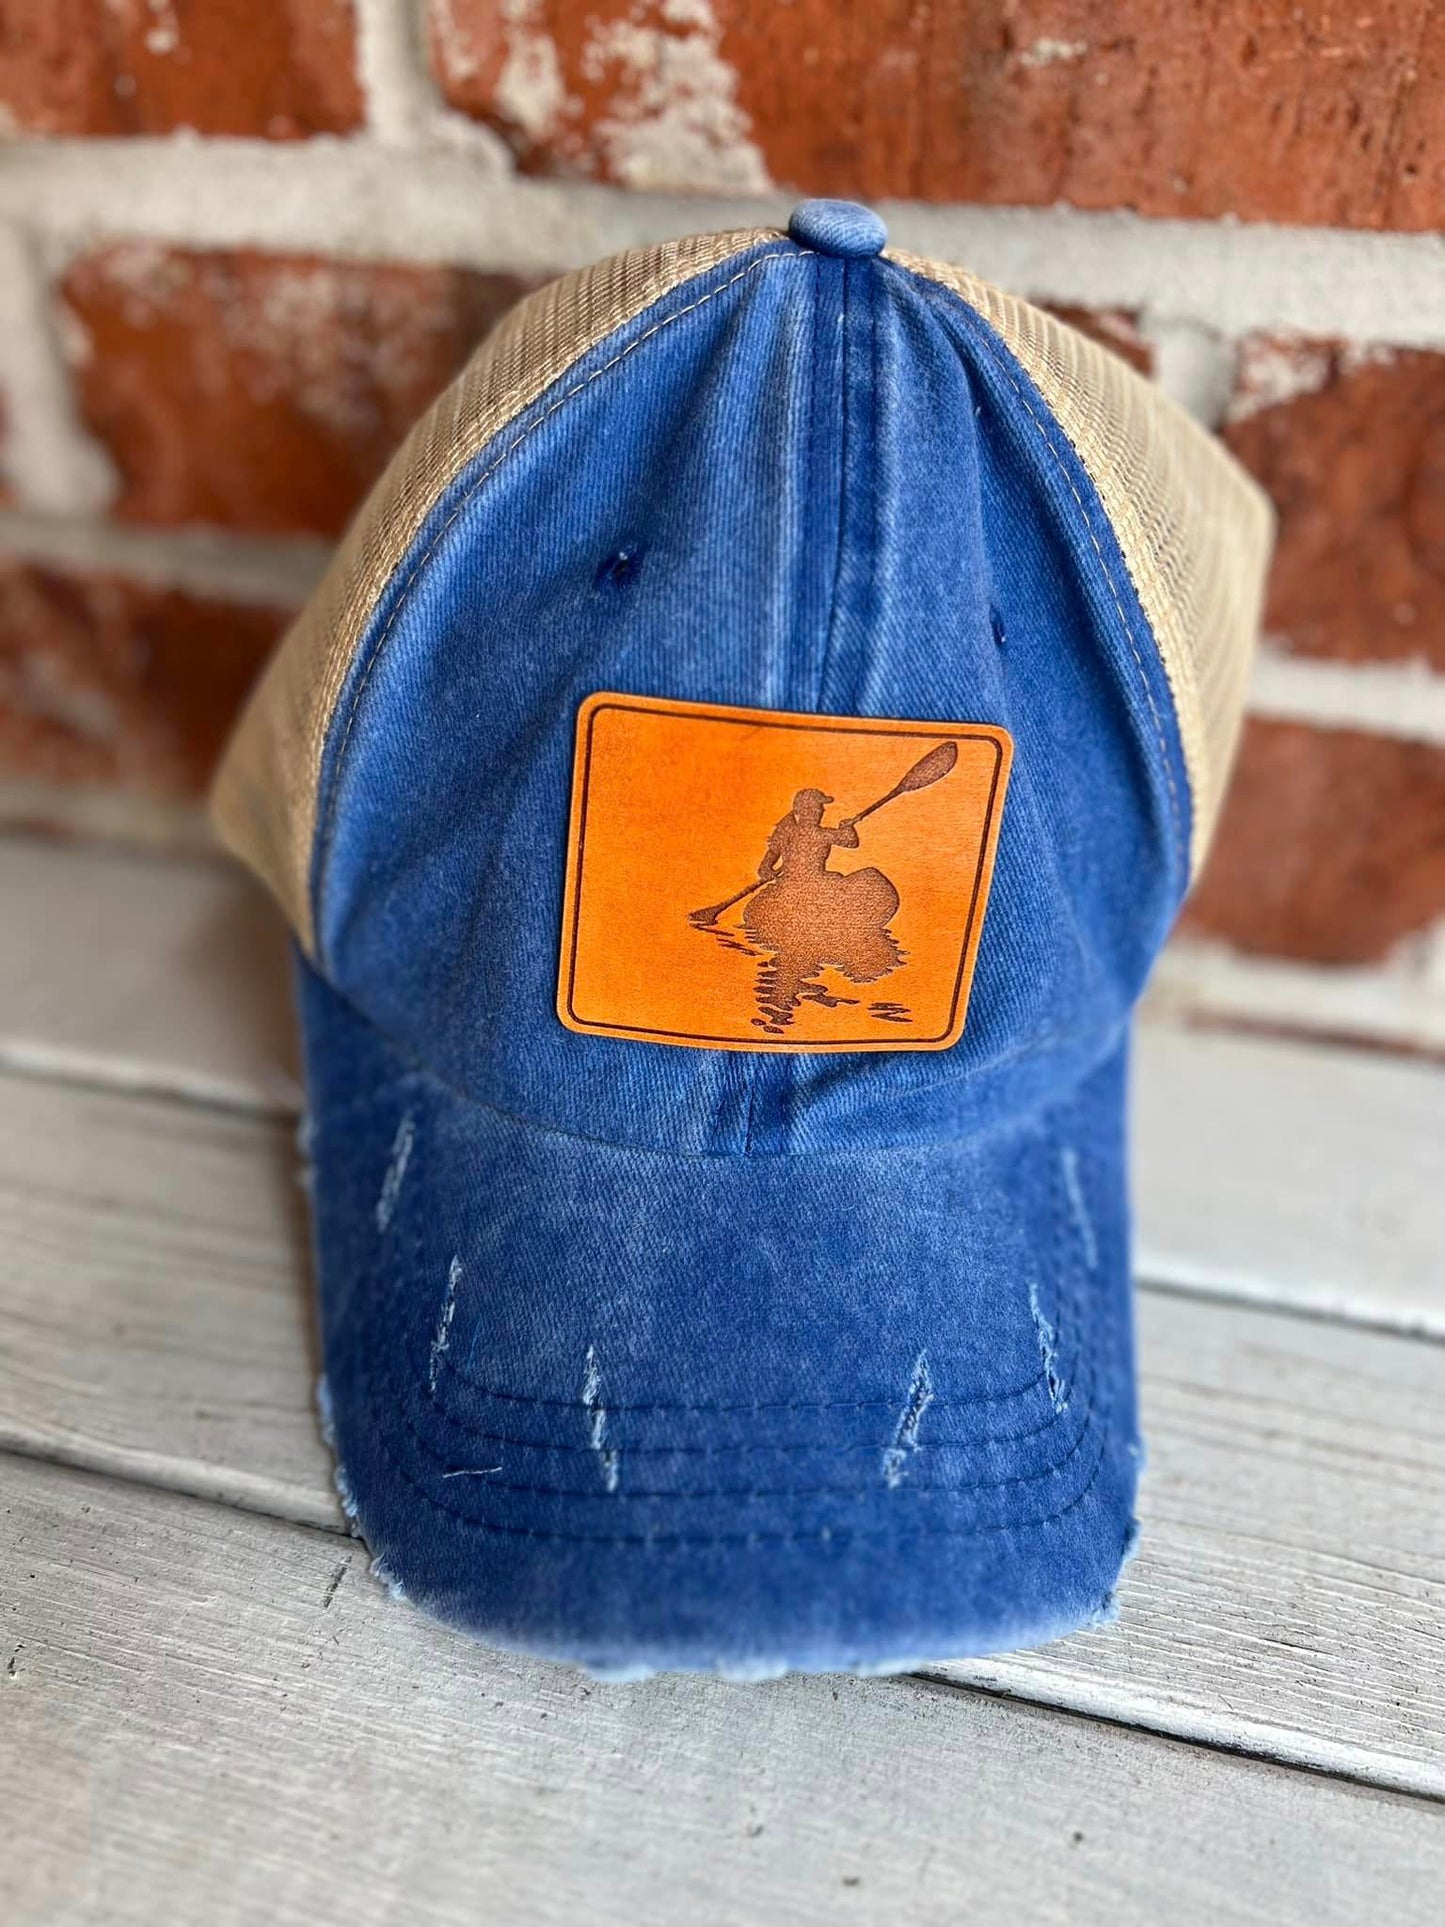 Distressed Ponytail Baseball Cap with Leather Patch Kayaker